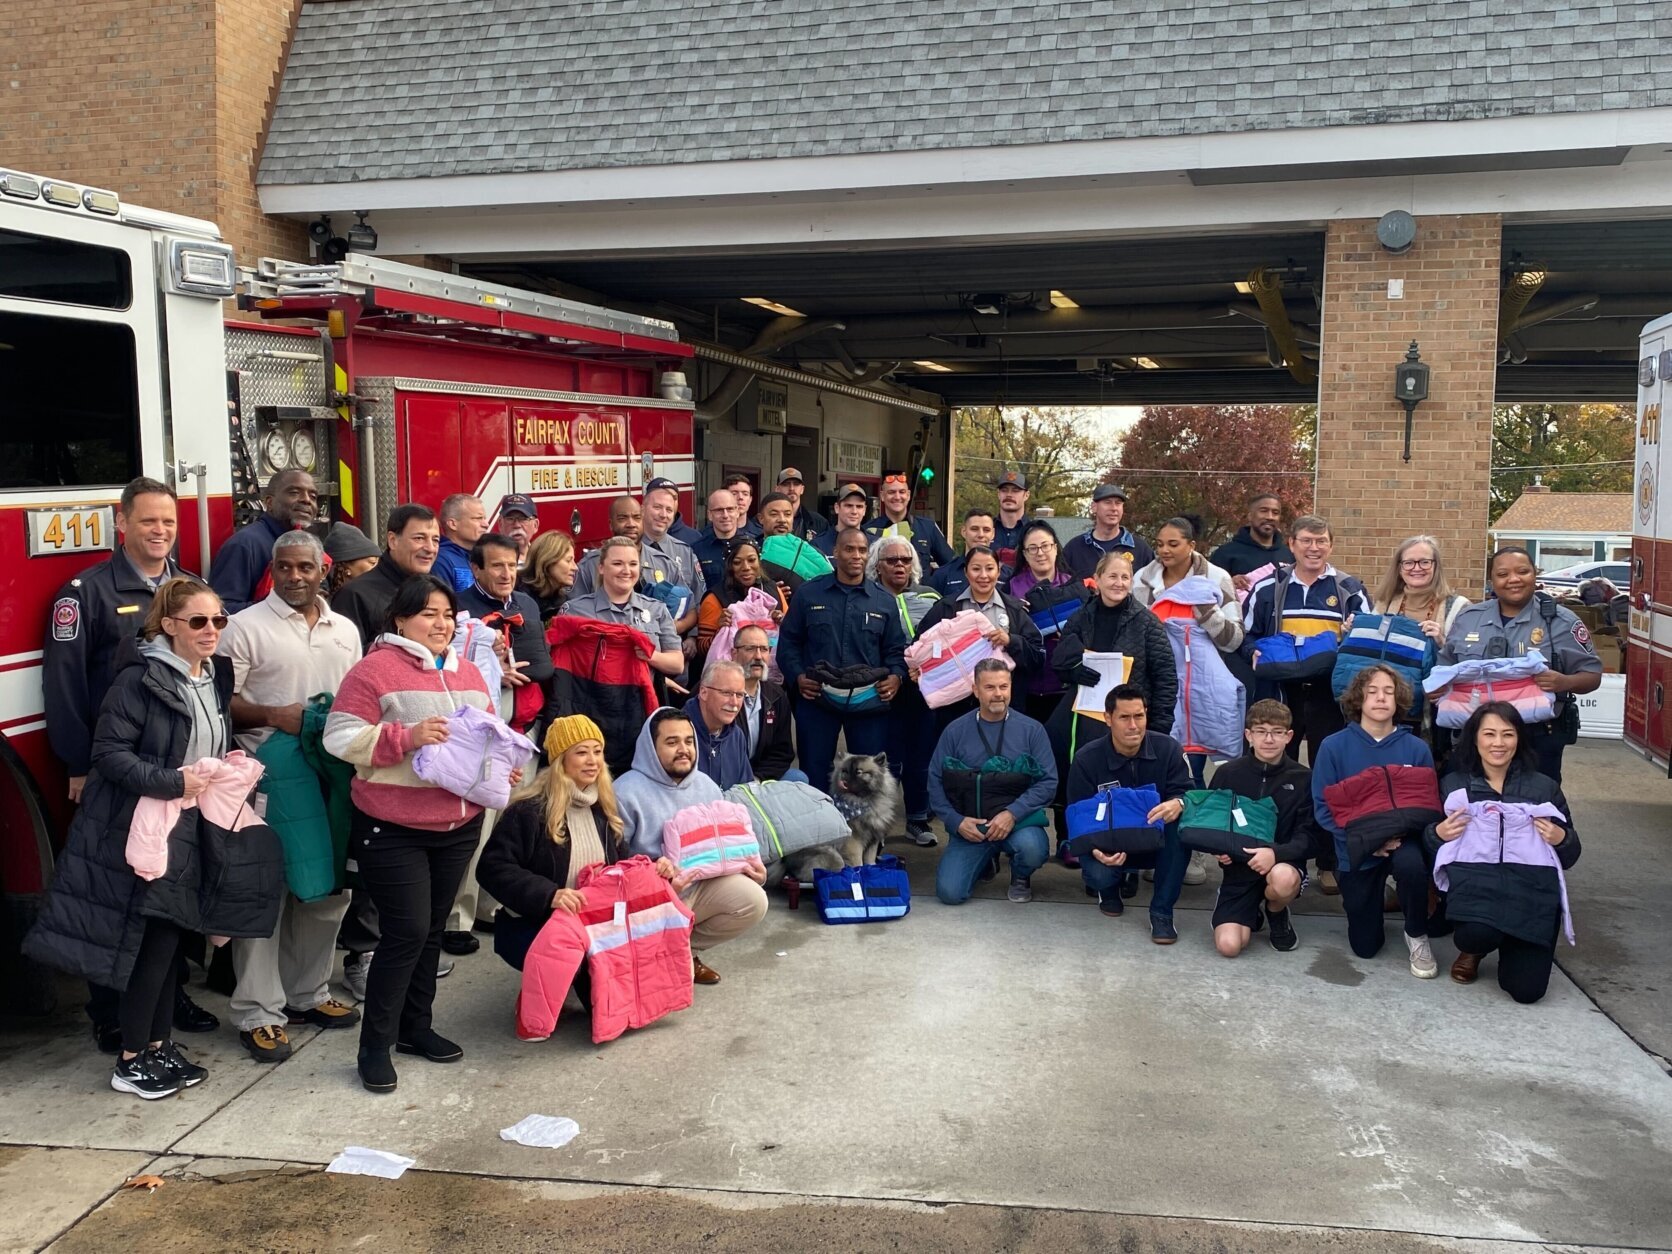 A crowd of people stand outside the firehouse holding up the free coats they received